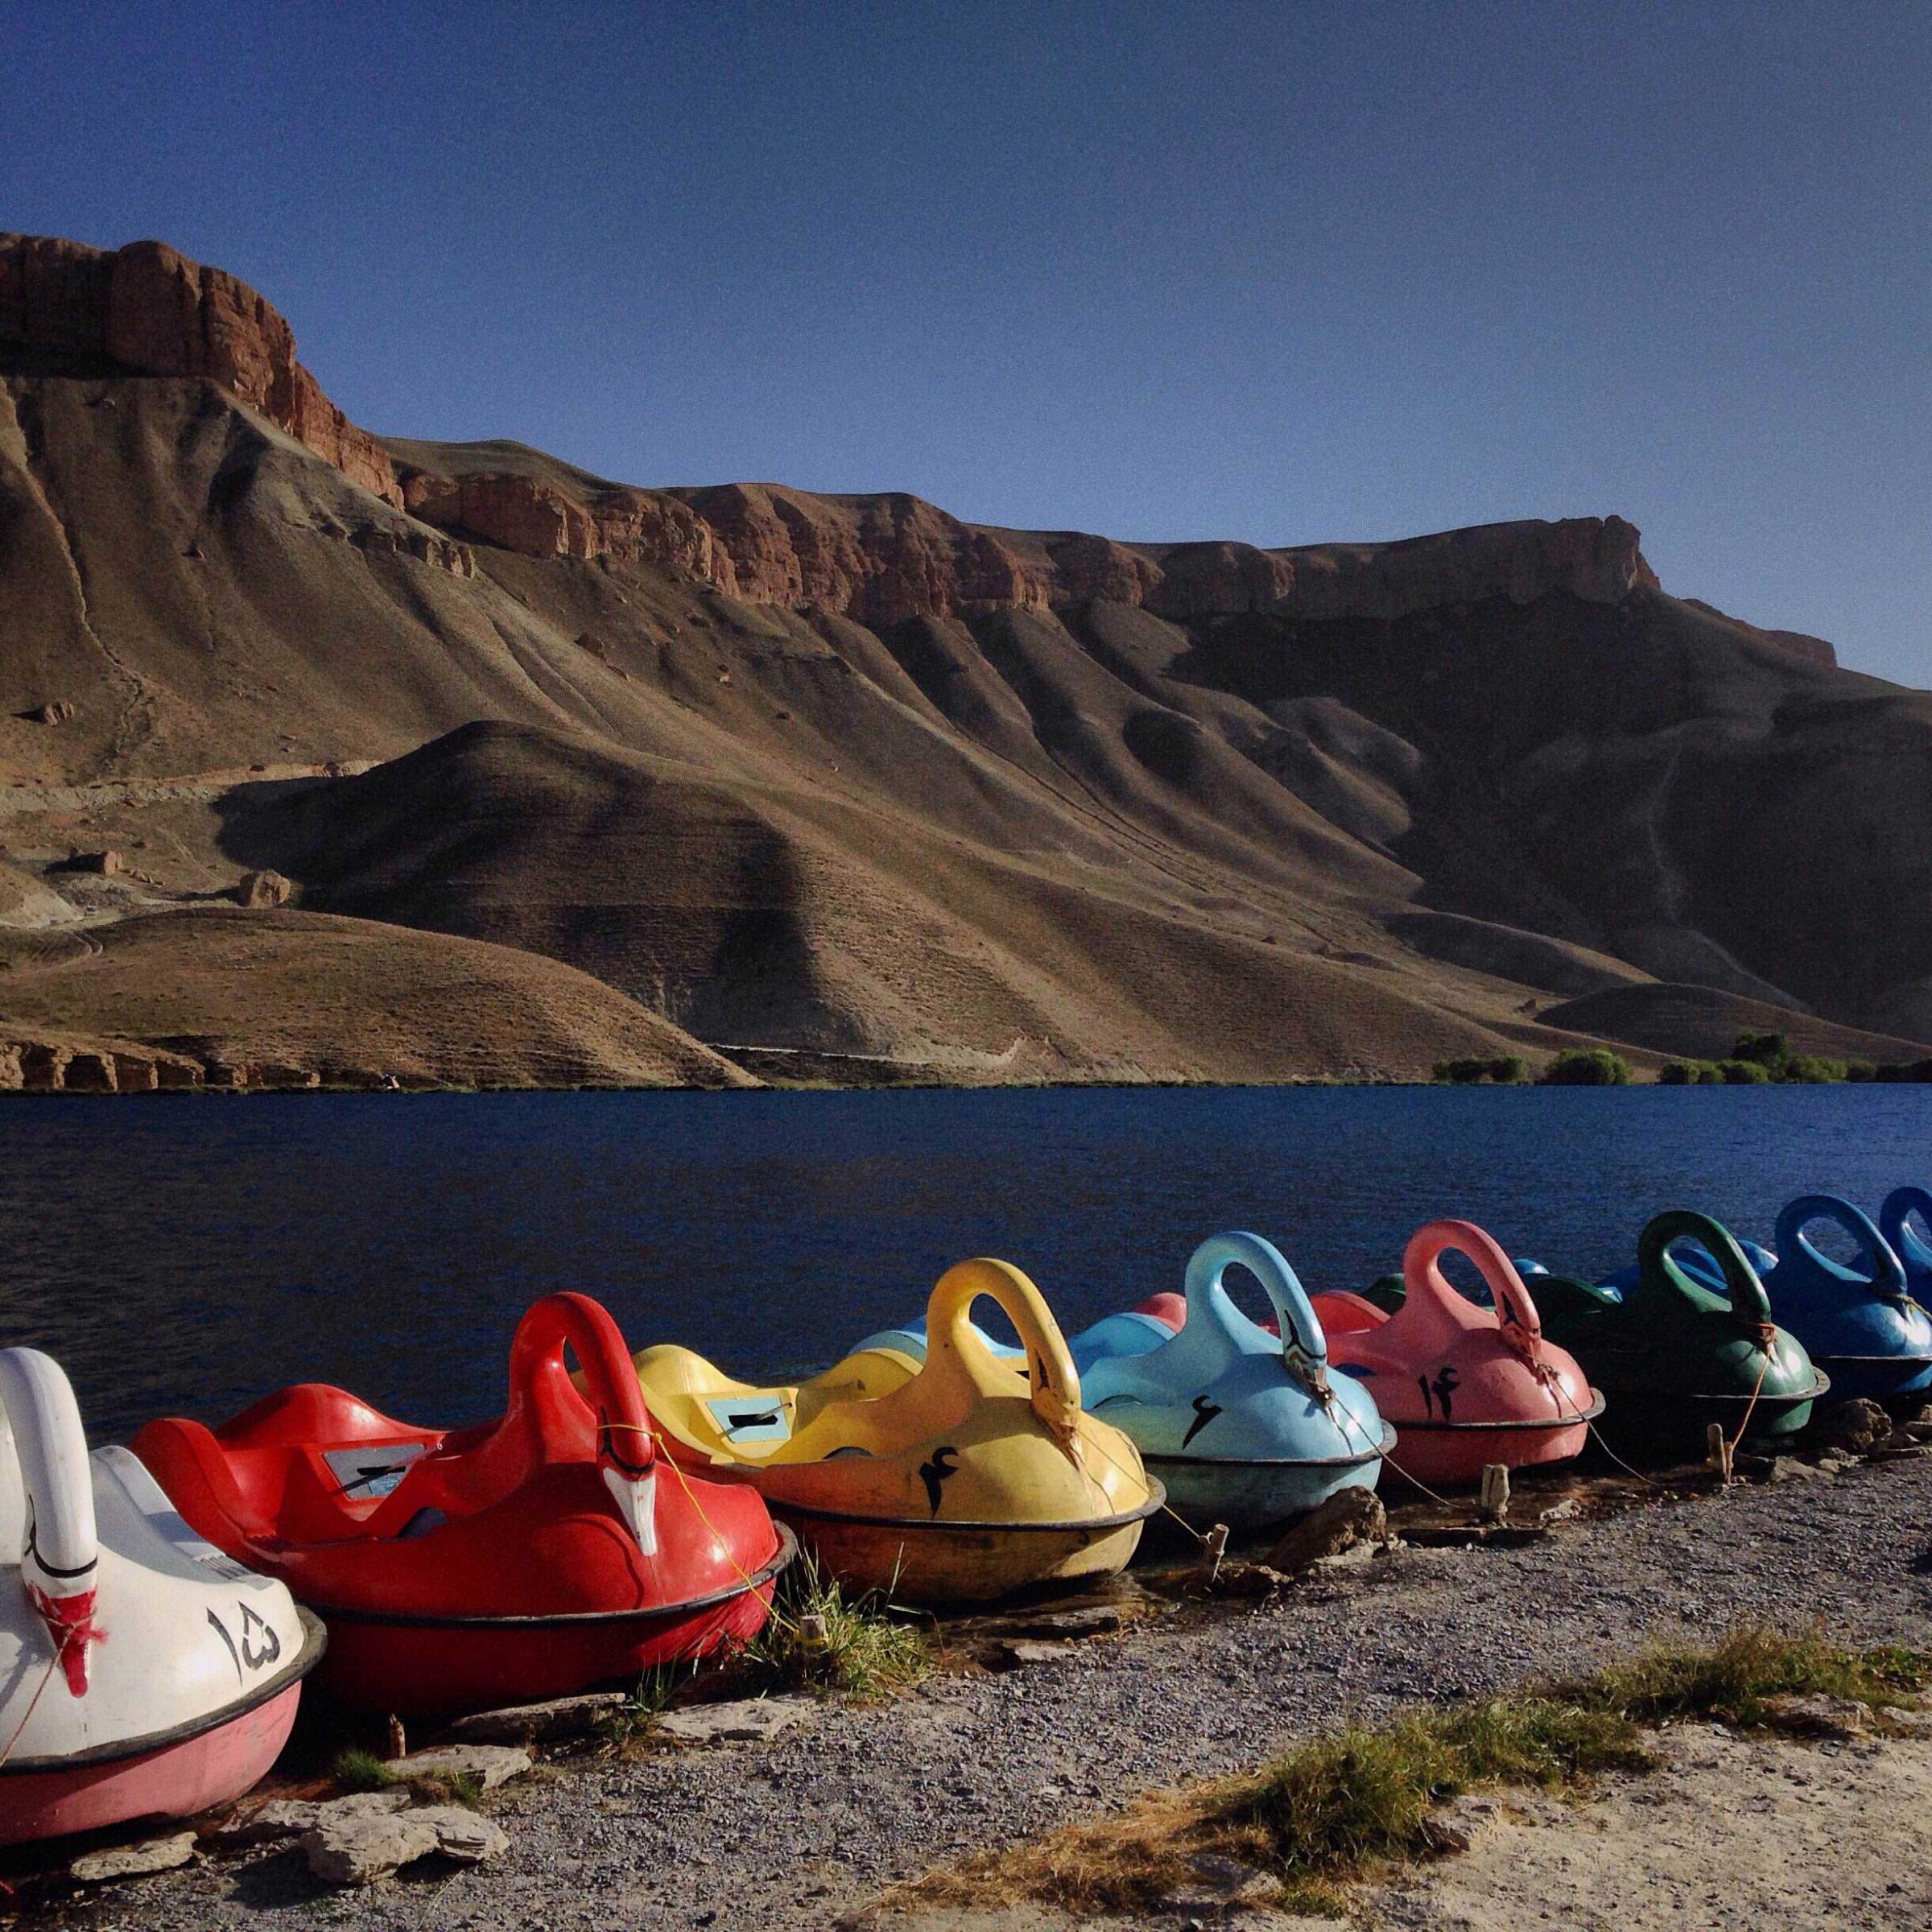 There probably isn't a person who comes to Band-e-Amir in Bamiyan Province that doesn't take this photograph. These paddle boats, rented for $6 (USD) as a foreigner and $3 as a local. The lake that they float on is an incredible azure blue- a color that seems completely incongruous in the windswept, high desert landscape. Taken in Bamiyan, AfganistanPhoto by Andrew Quilty/Oculi (@andrewquilty)